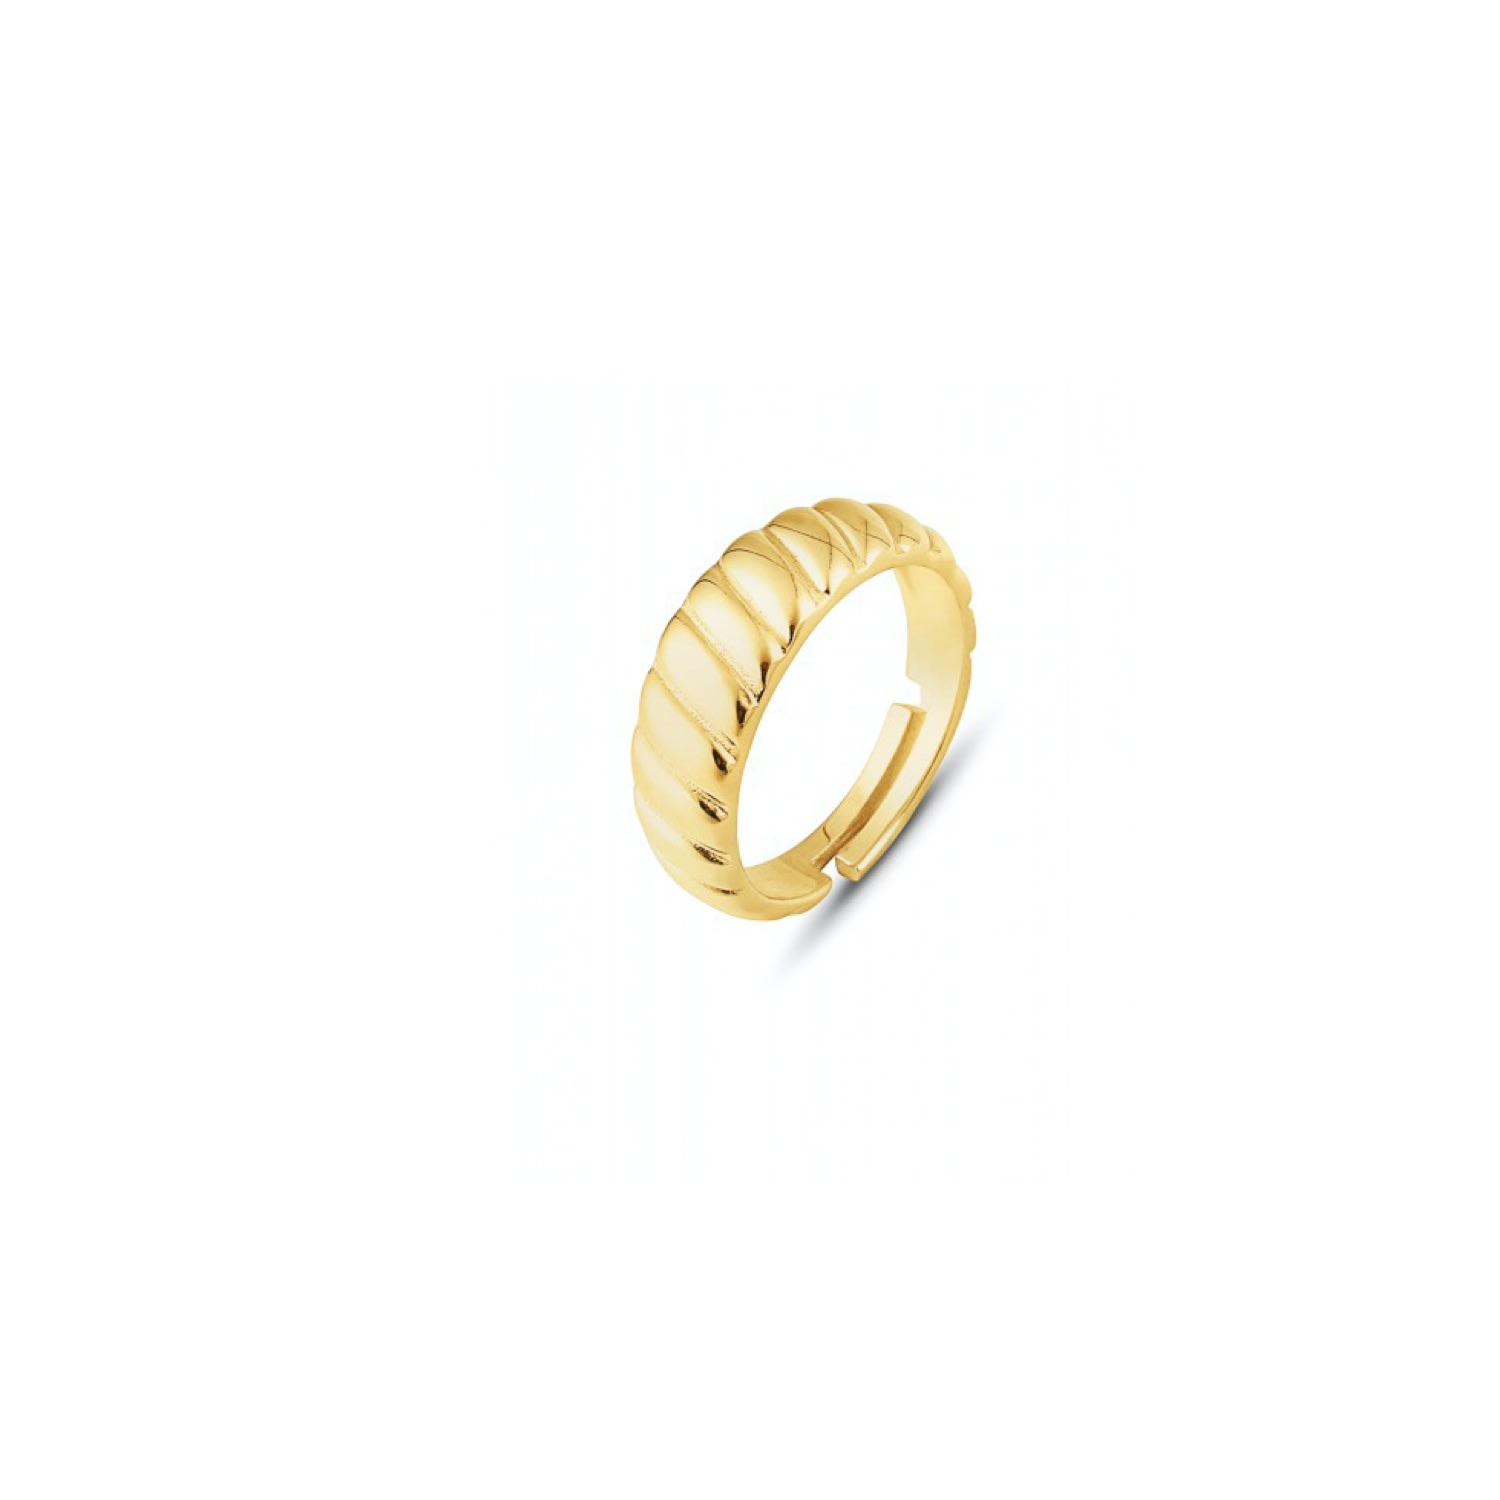 Spero London Women's Croissant Ring In Sterling Silver Gold Vermeil - Gold In Gray